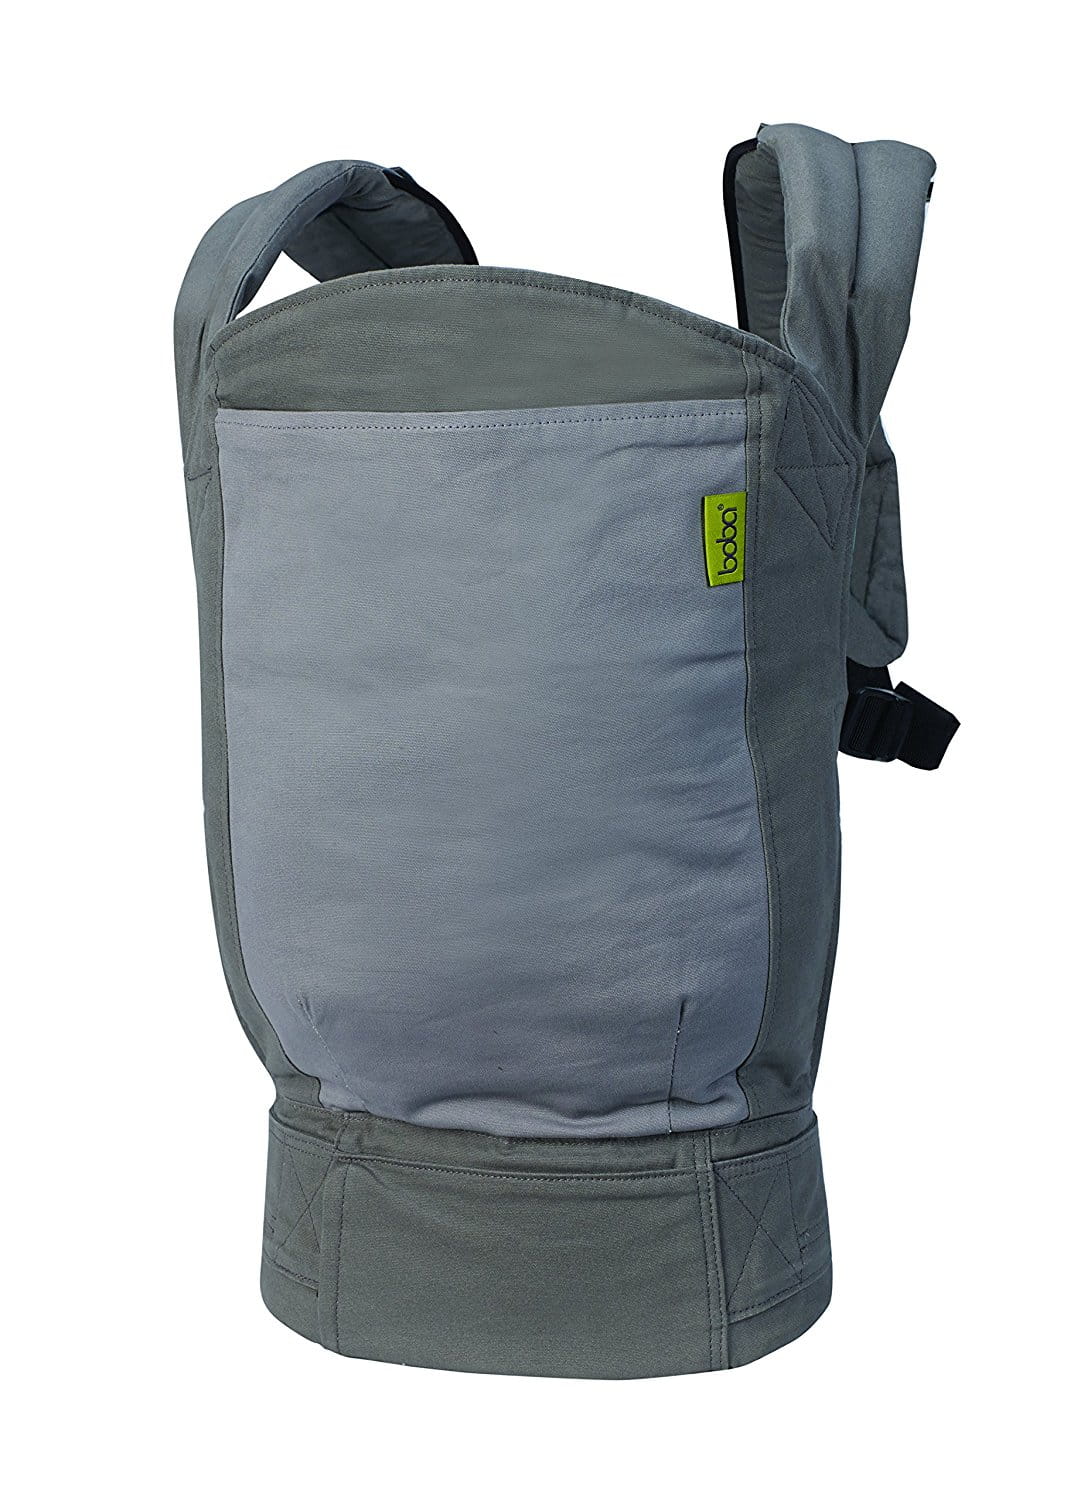 an image of the boba baby carrier